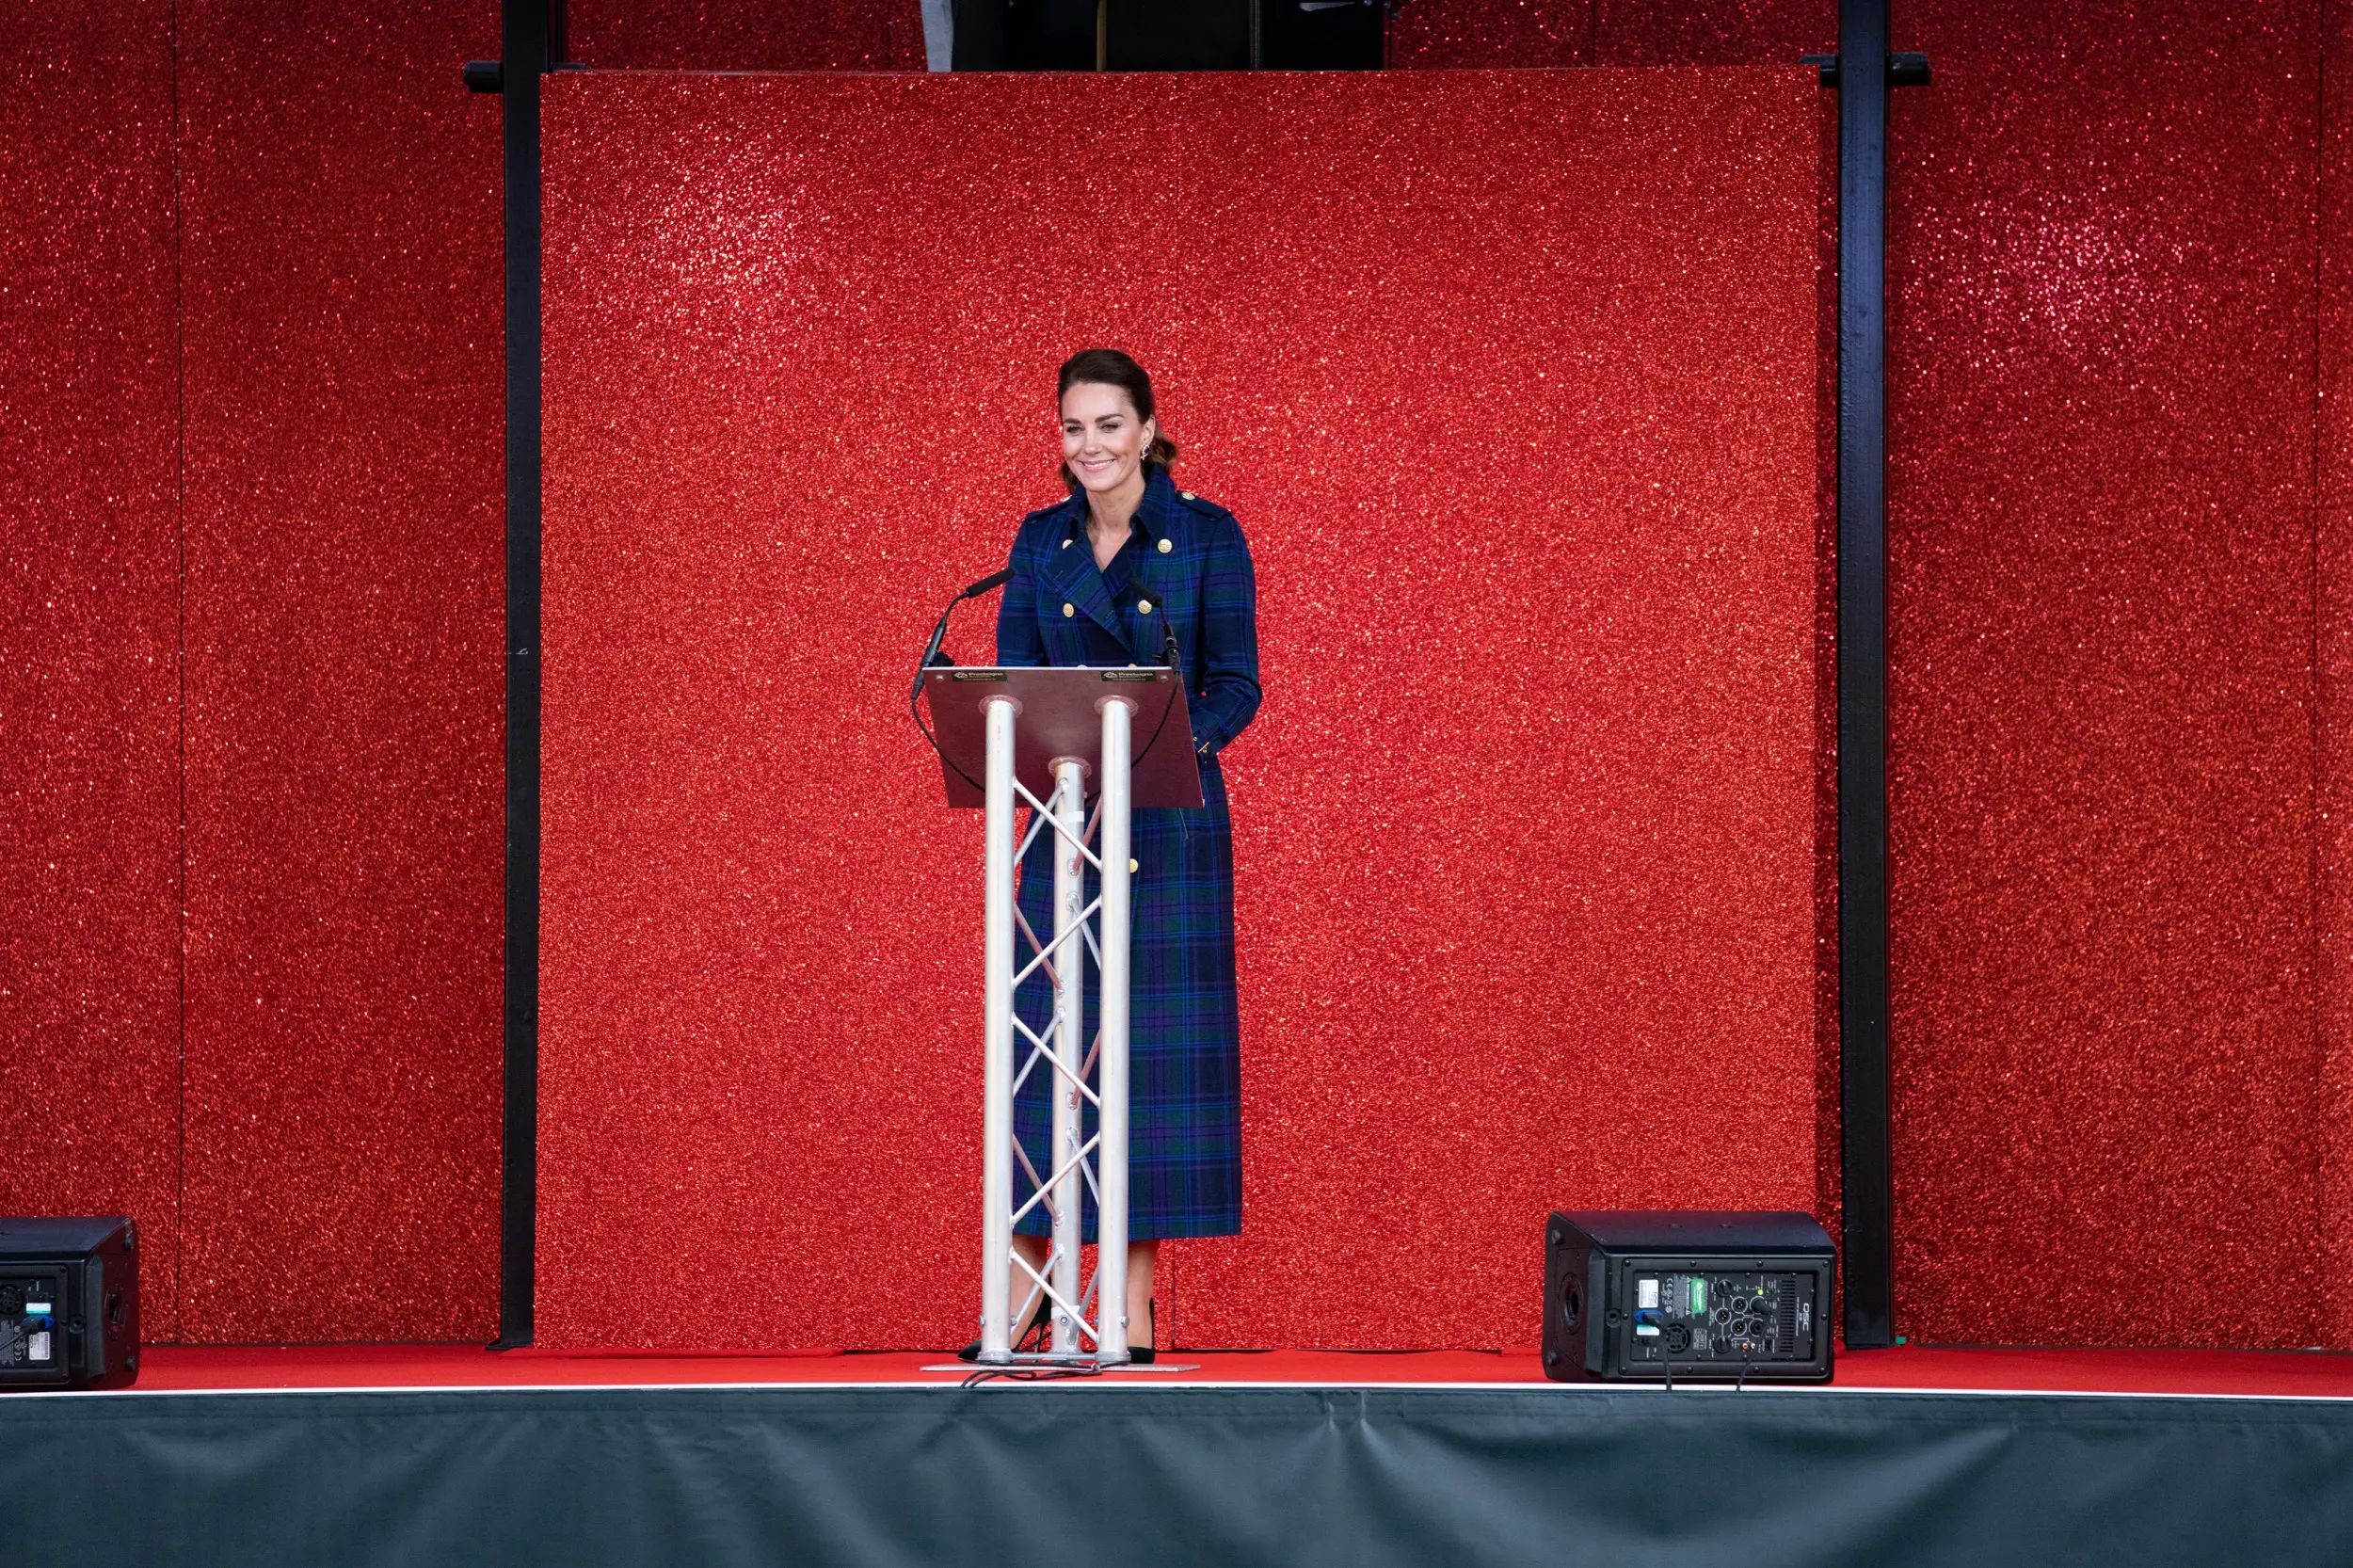 The Duchess of Cambridge addressed the guests ahead of the screening